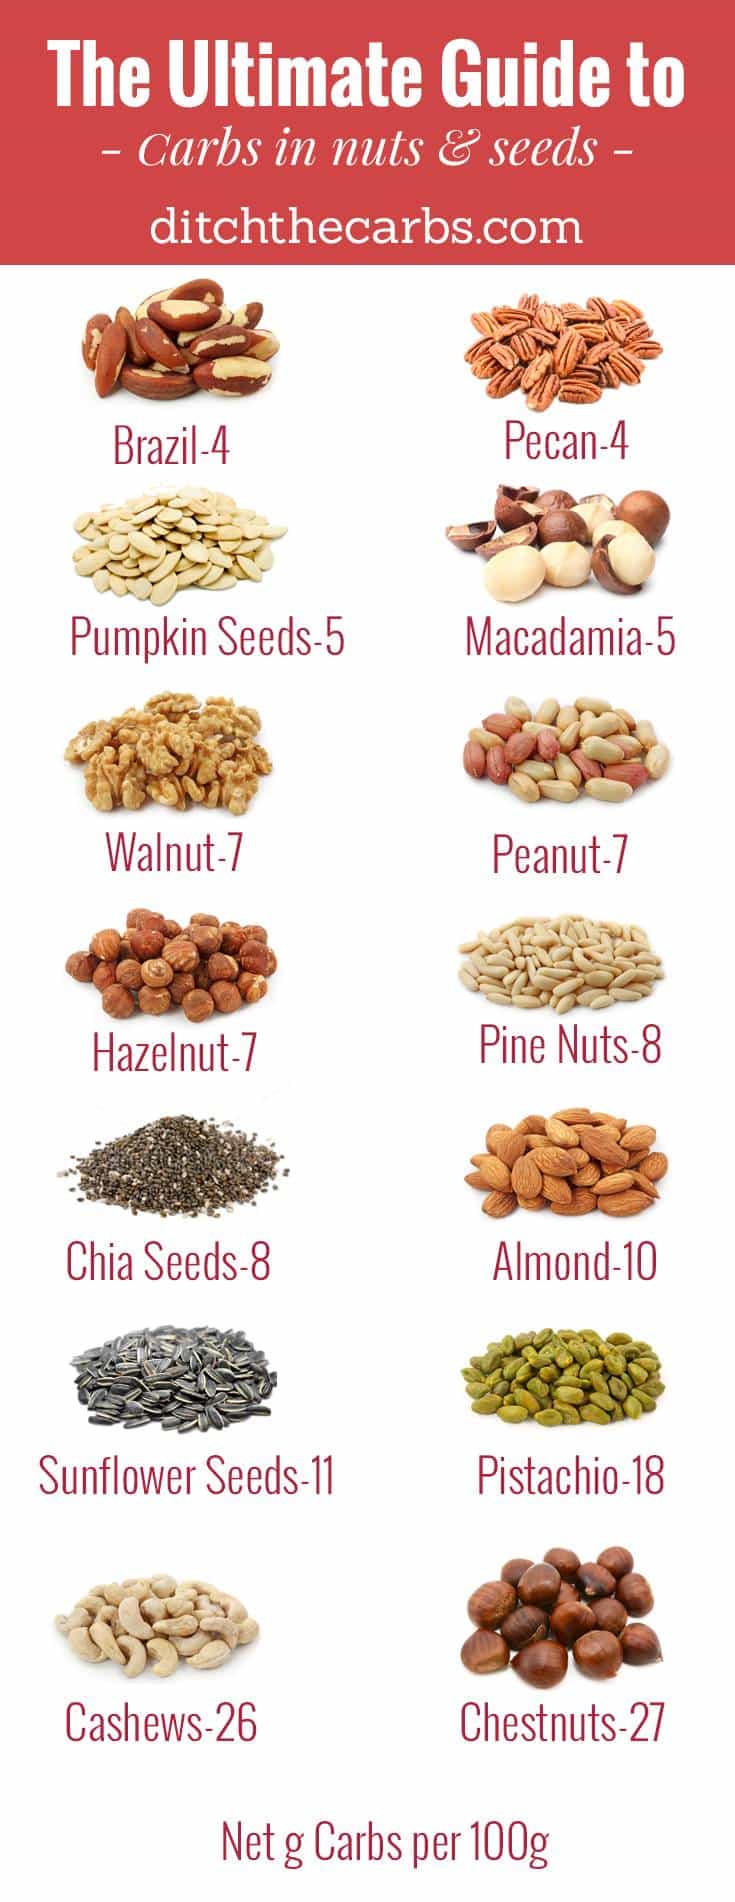 different types of low carb nuts and their net grams of carbs